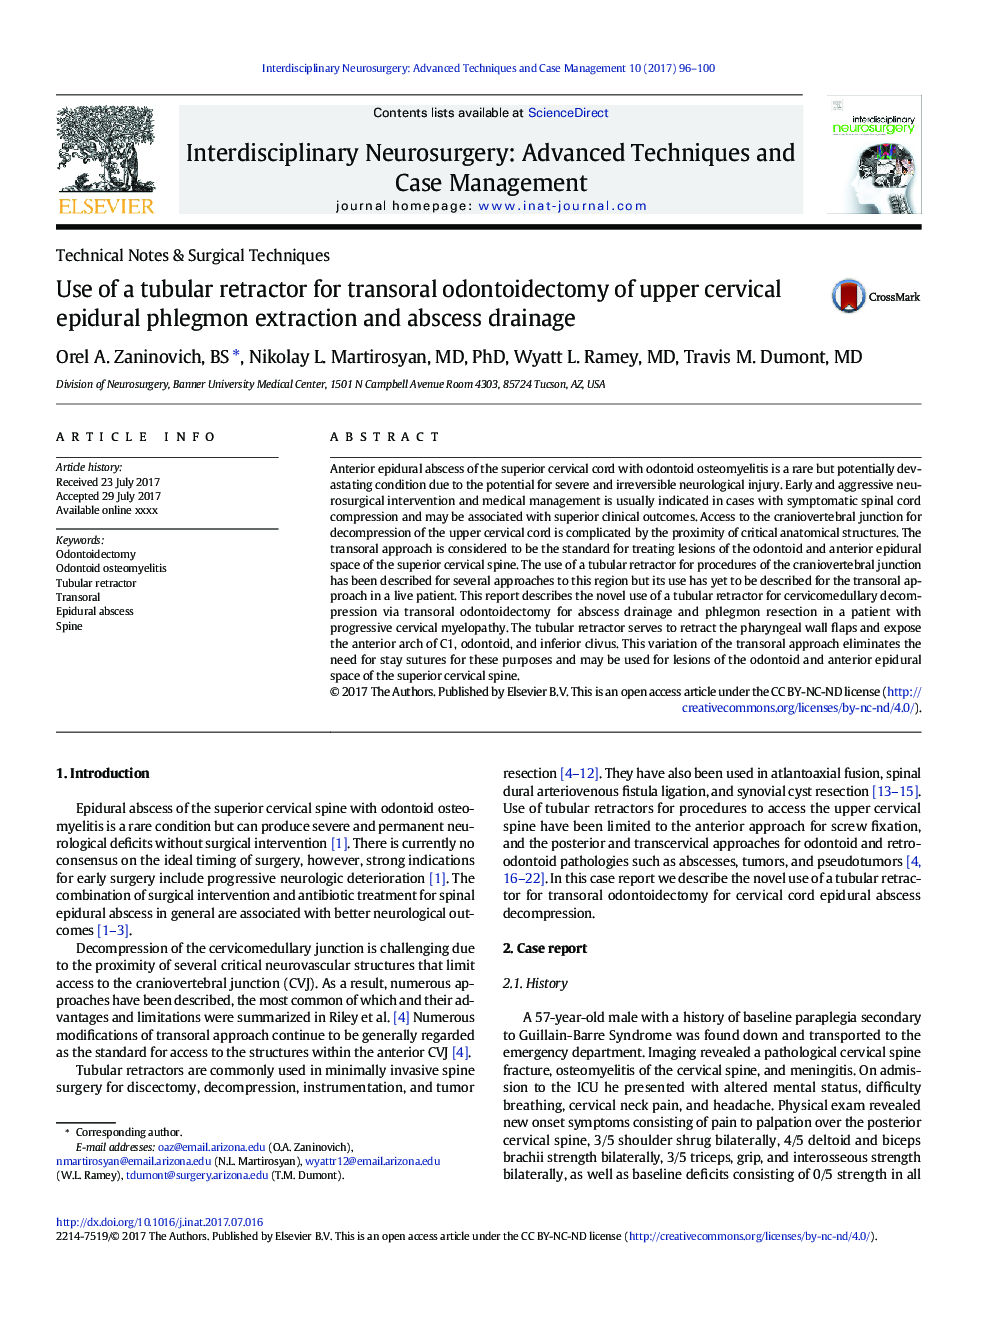 Technical Notes & Surgical TechniquesUse of a tubular retractor for transoral odontoidectomy of upper cervical epidural phlegmon extraction and abscess drainage